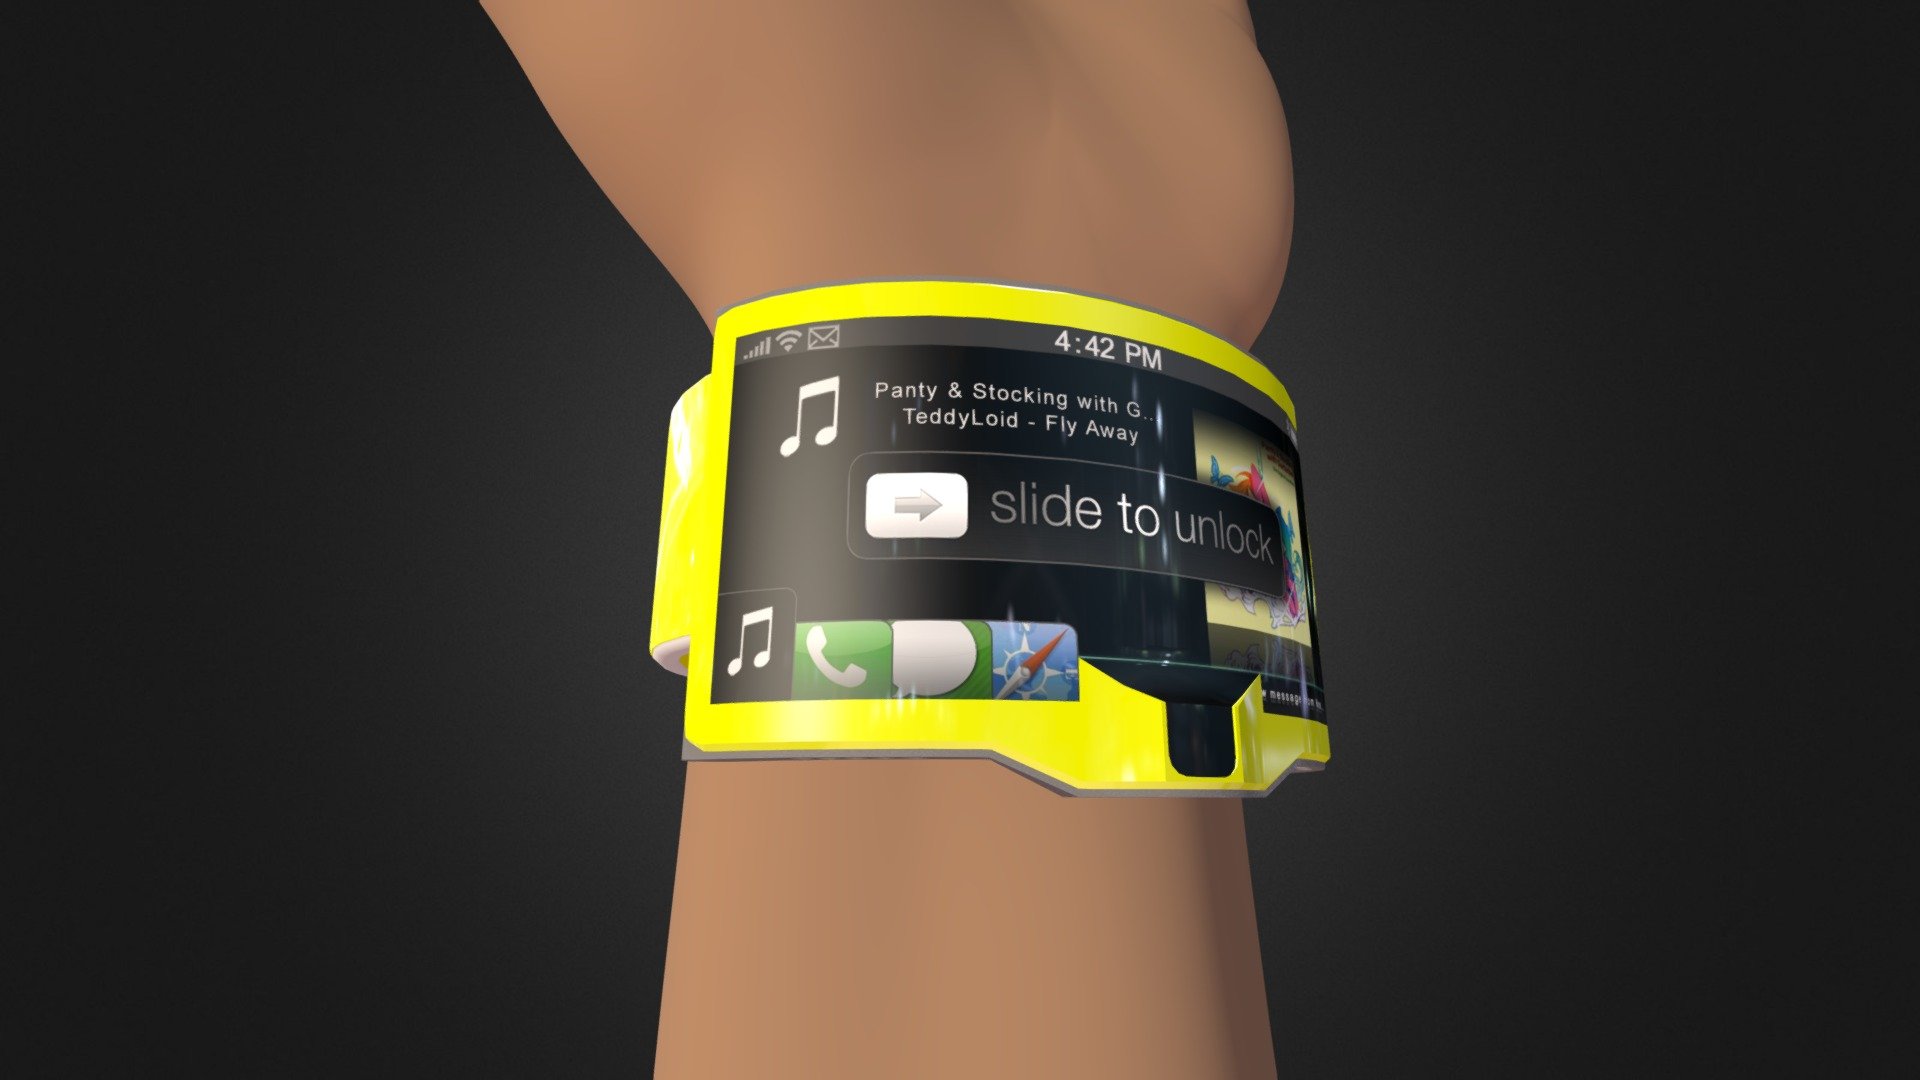 iWatch model. based mostly on iPod nano design and iPhone OS. The screen is small so you can interact with the movement of you hand instead of touching the screen not to hide it.  like this - iWatch - 3D model by Mestaty 3d model